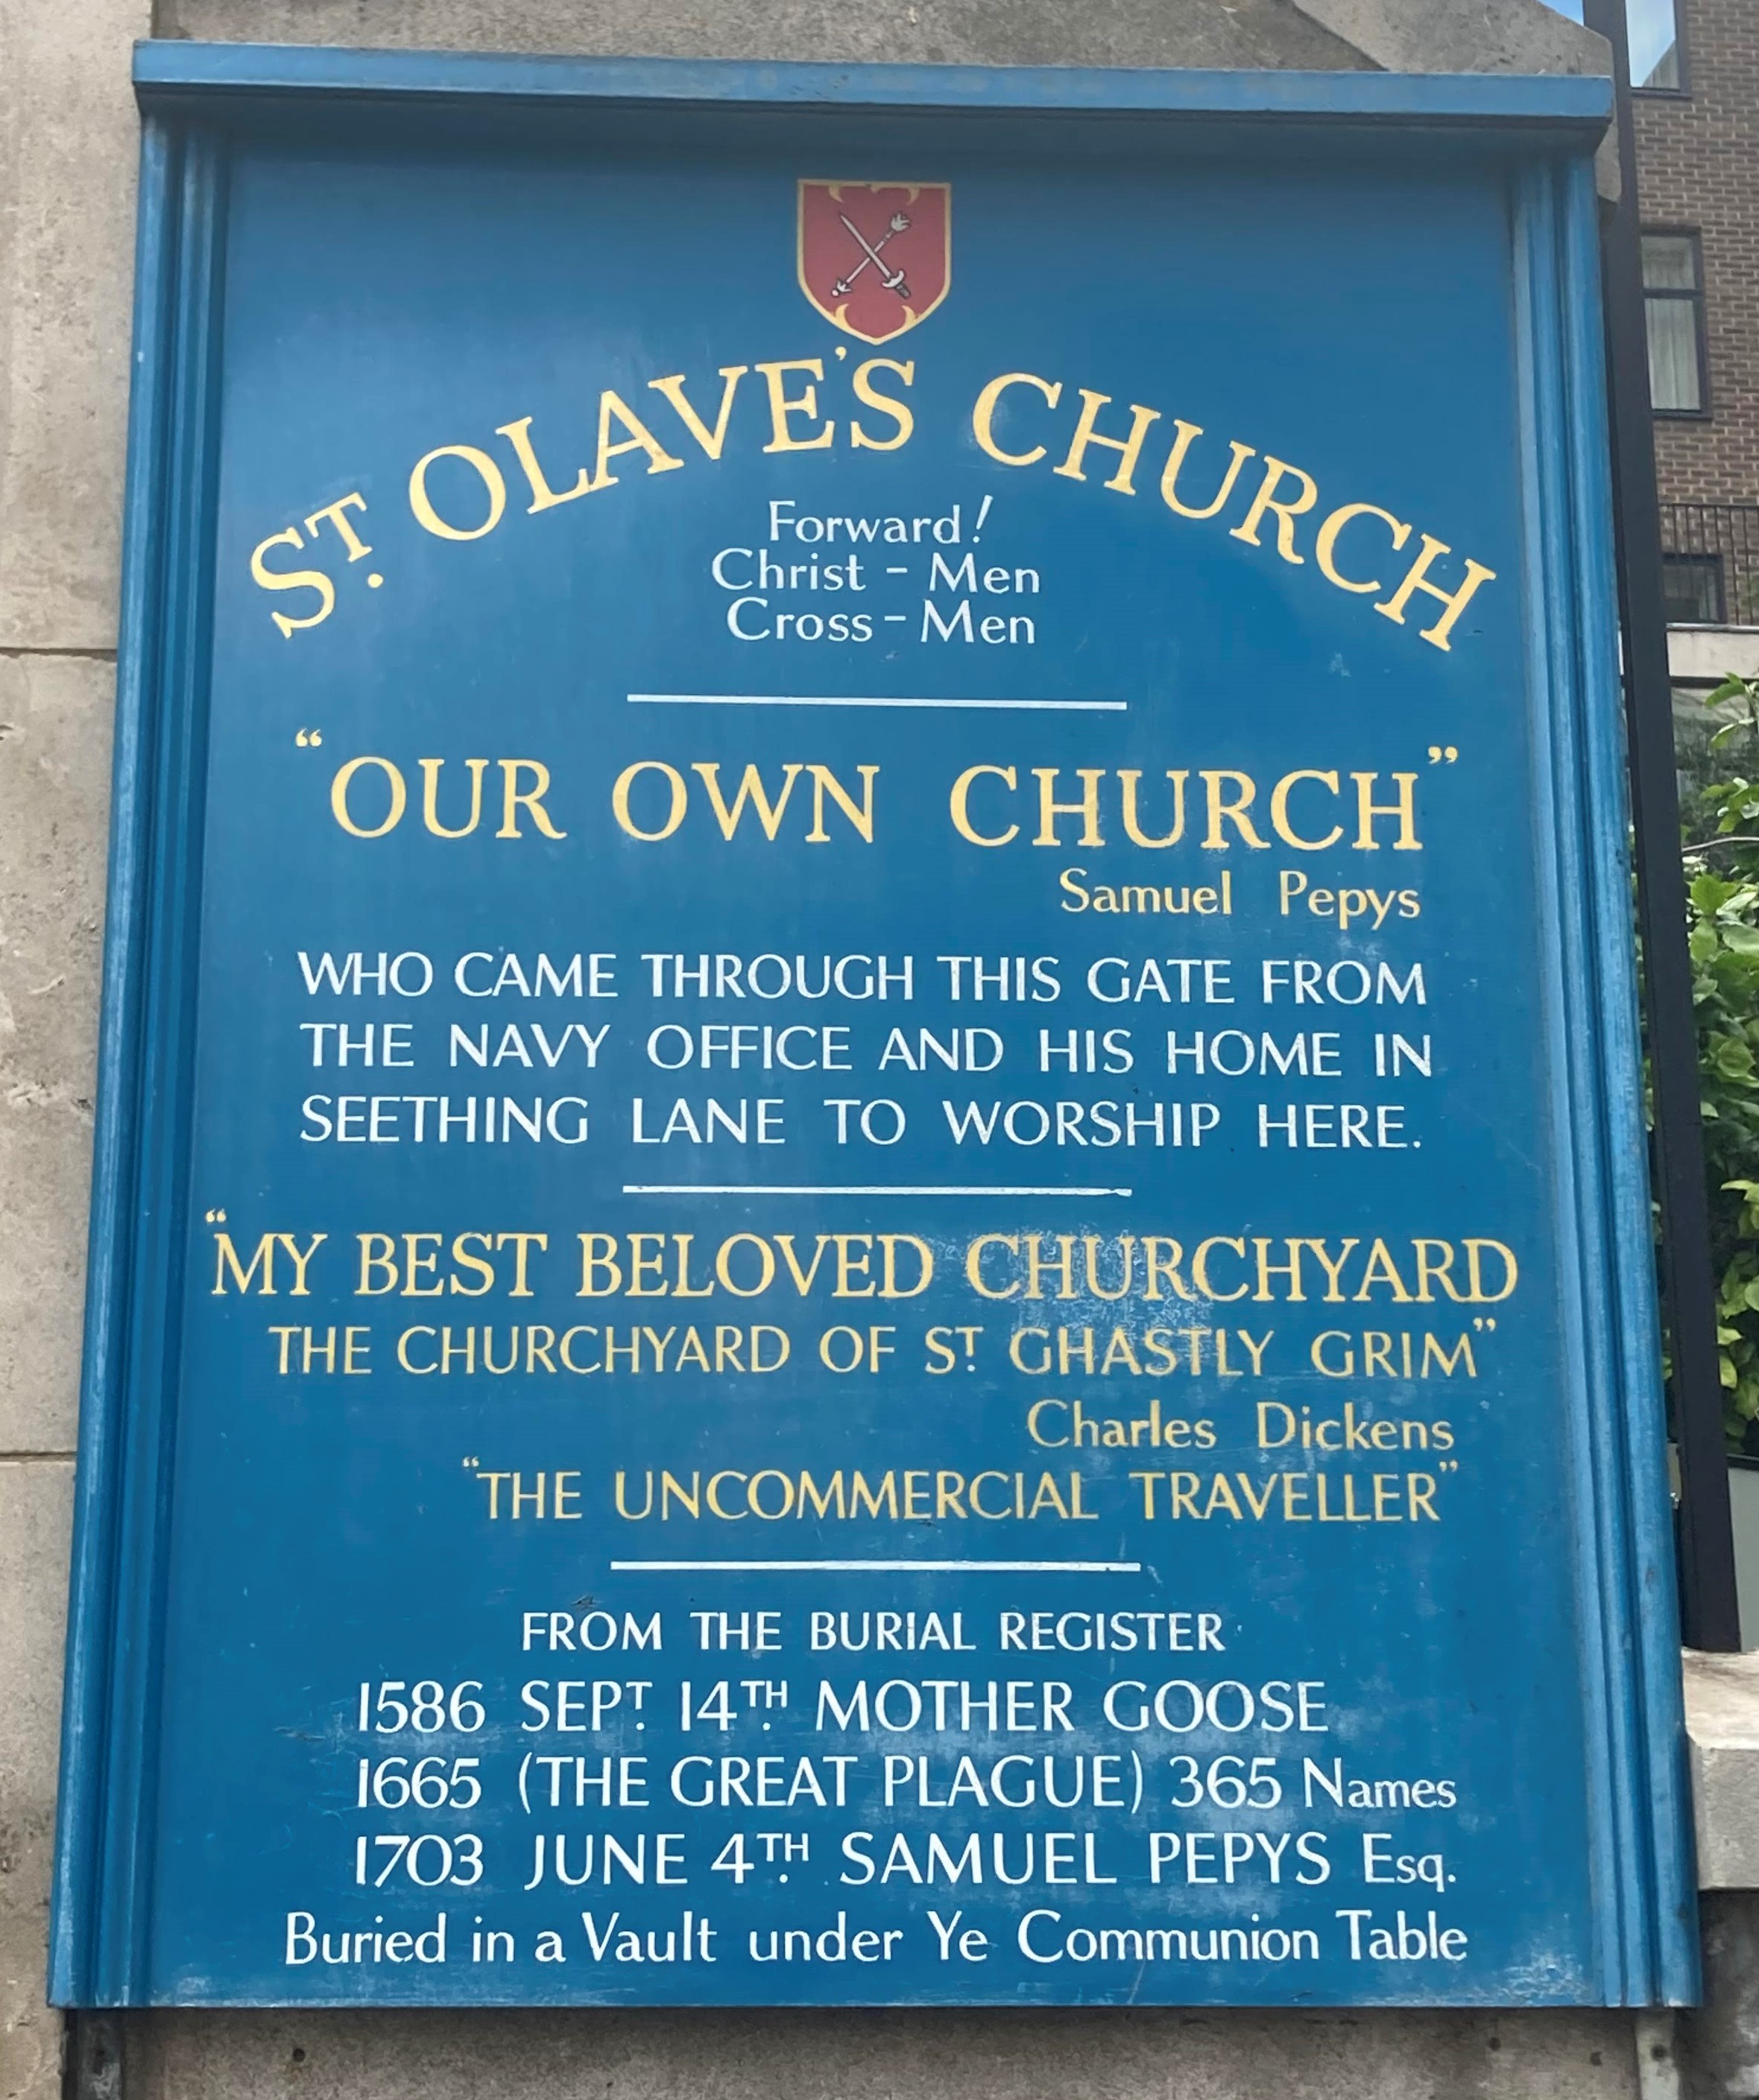 St Olave's Welcome